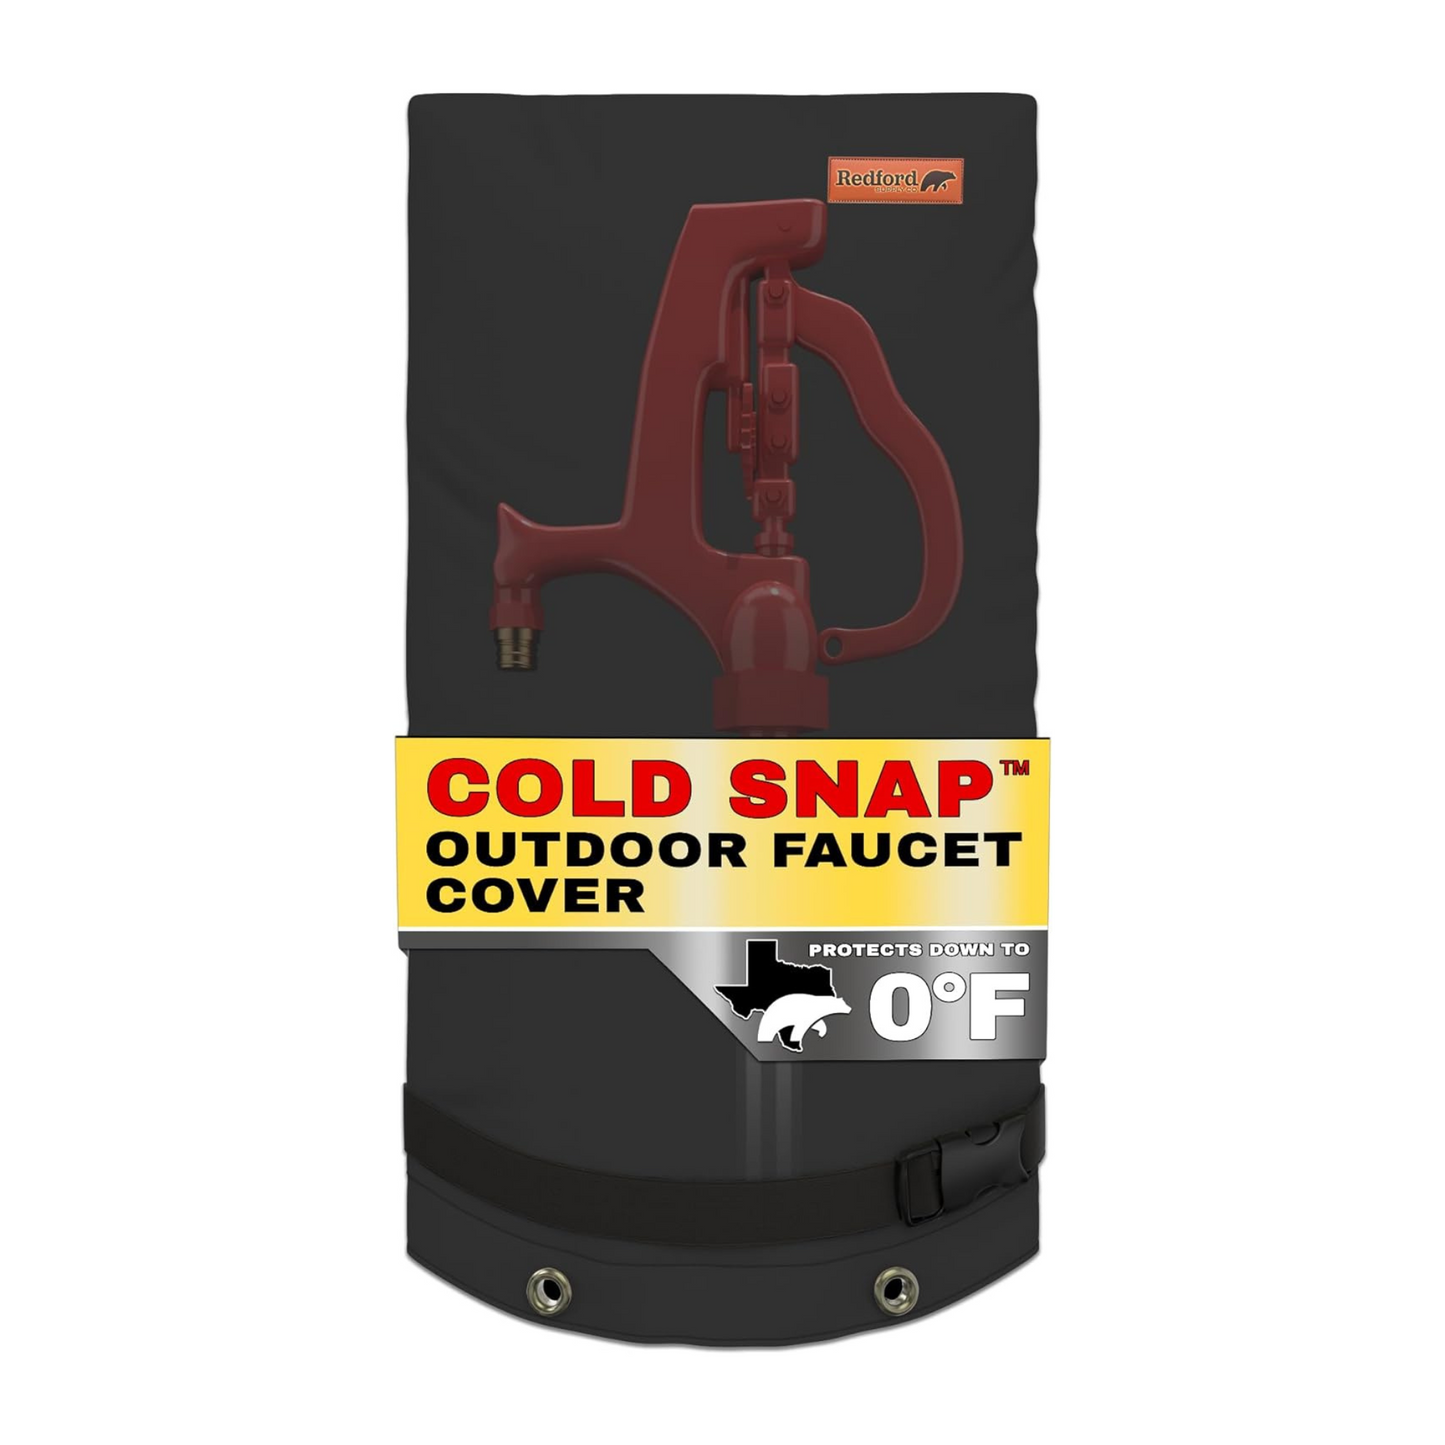 Redford Supply Co. Cold Snap (0°F) Double Wall Long Faucet Covers for Winter Insulated - Spigot Covers Winter Insulated, Water Faucet Covers for Outside, Faucet Cover Socks (14"W x 27"H, Black)